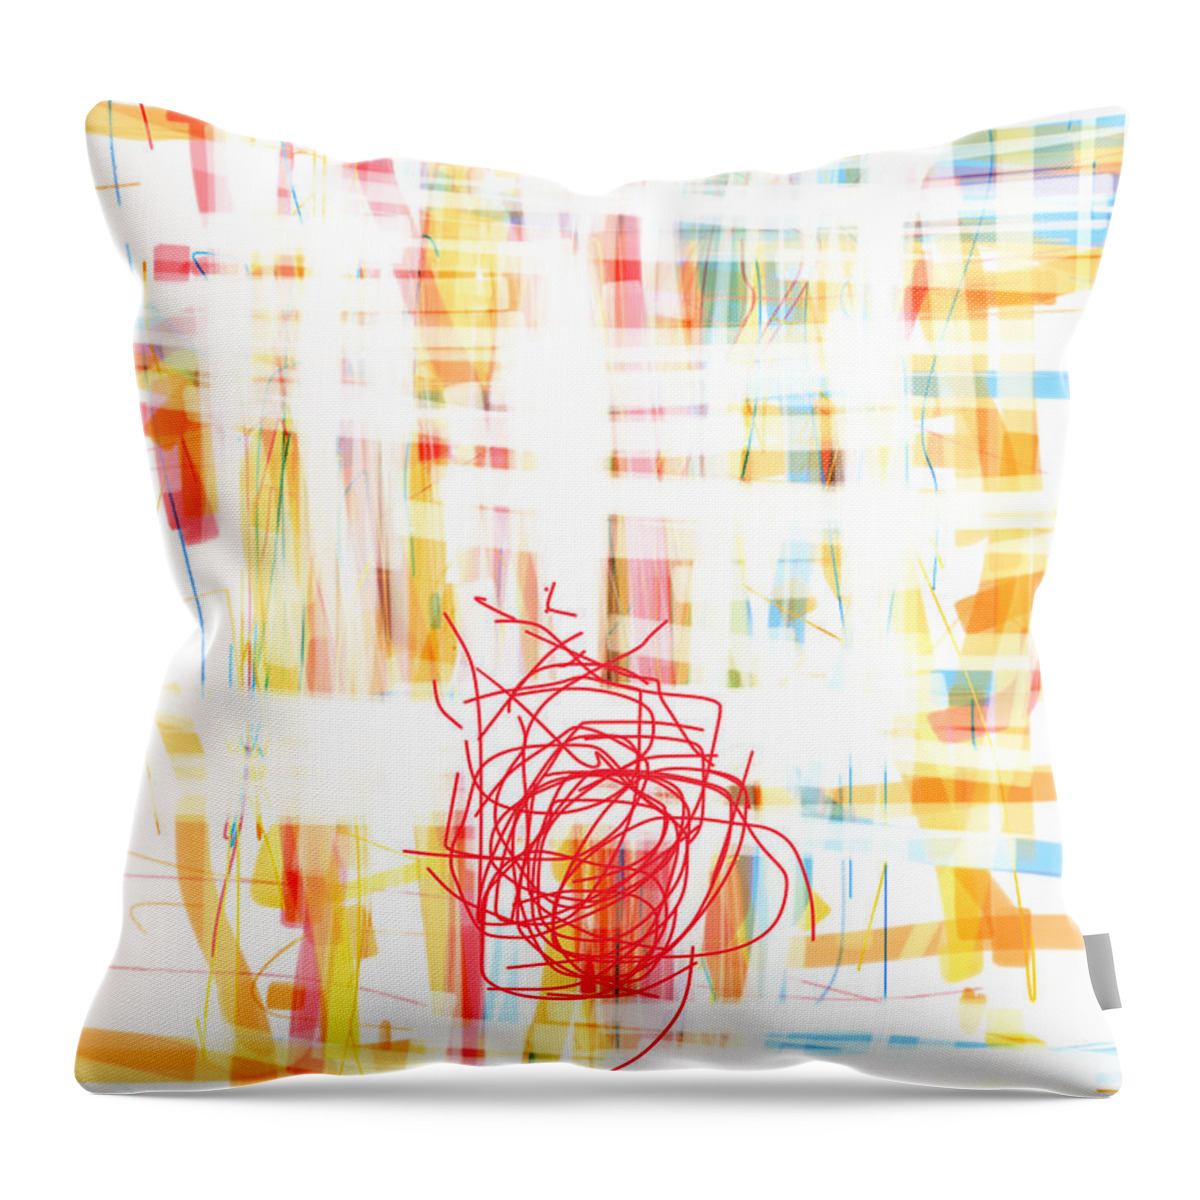 In The Heat Of The Moment Throw Pillow featuring the digital art In the heat of the moment by Ingrid Van Amsterdam